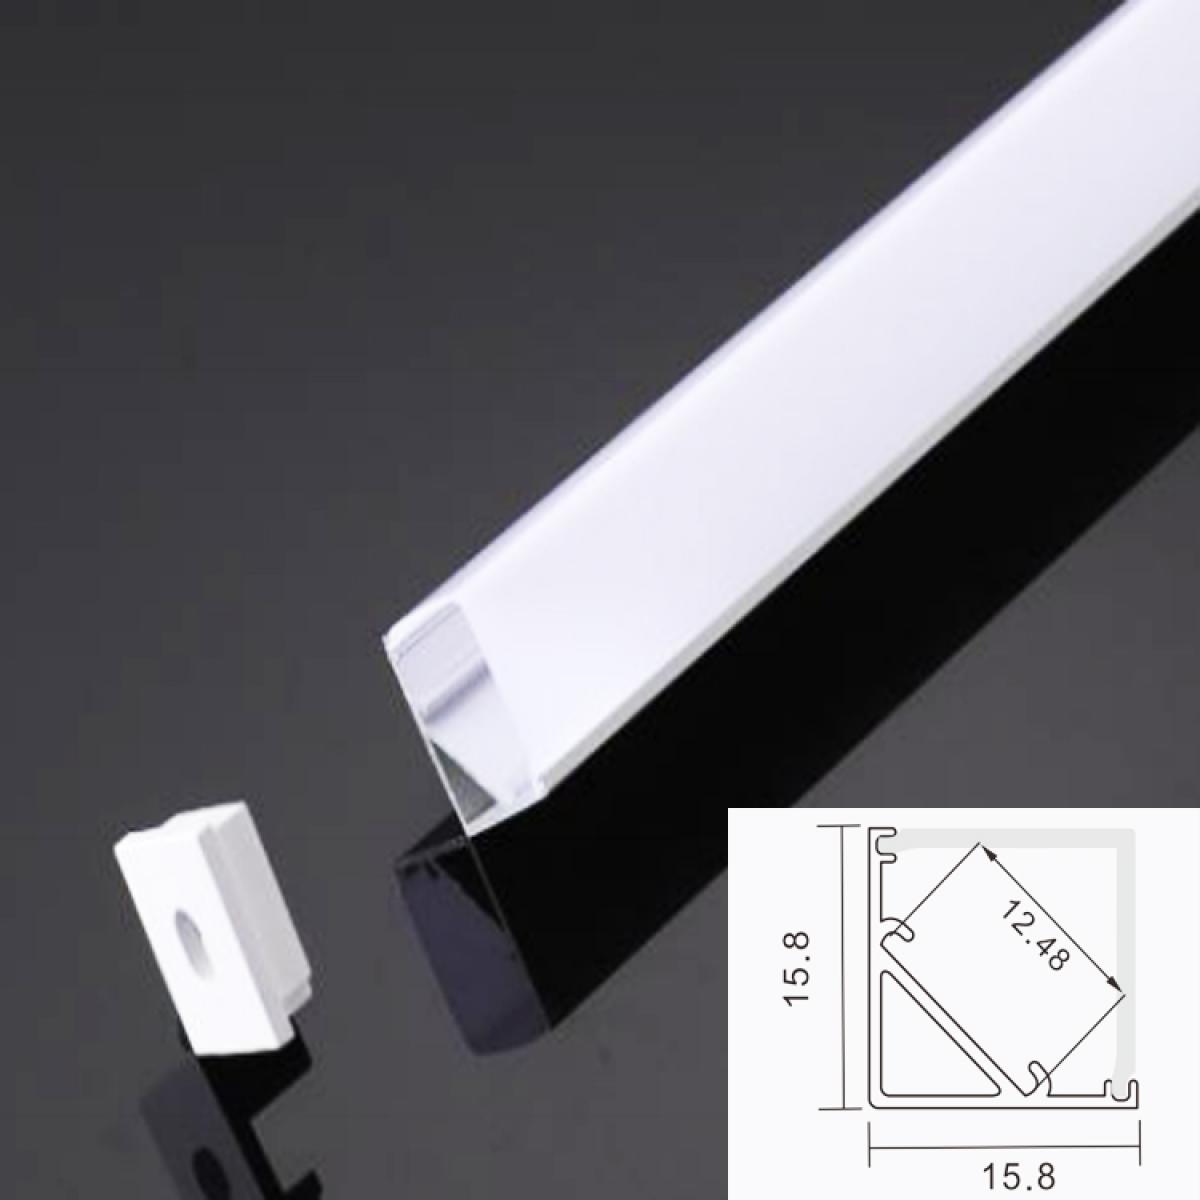 China Supplier Top Led Tape Diffusion Channel Aluminum Profile For Led Strip Light, Factory Price LED Extrusion